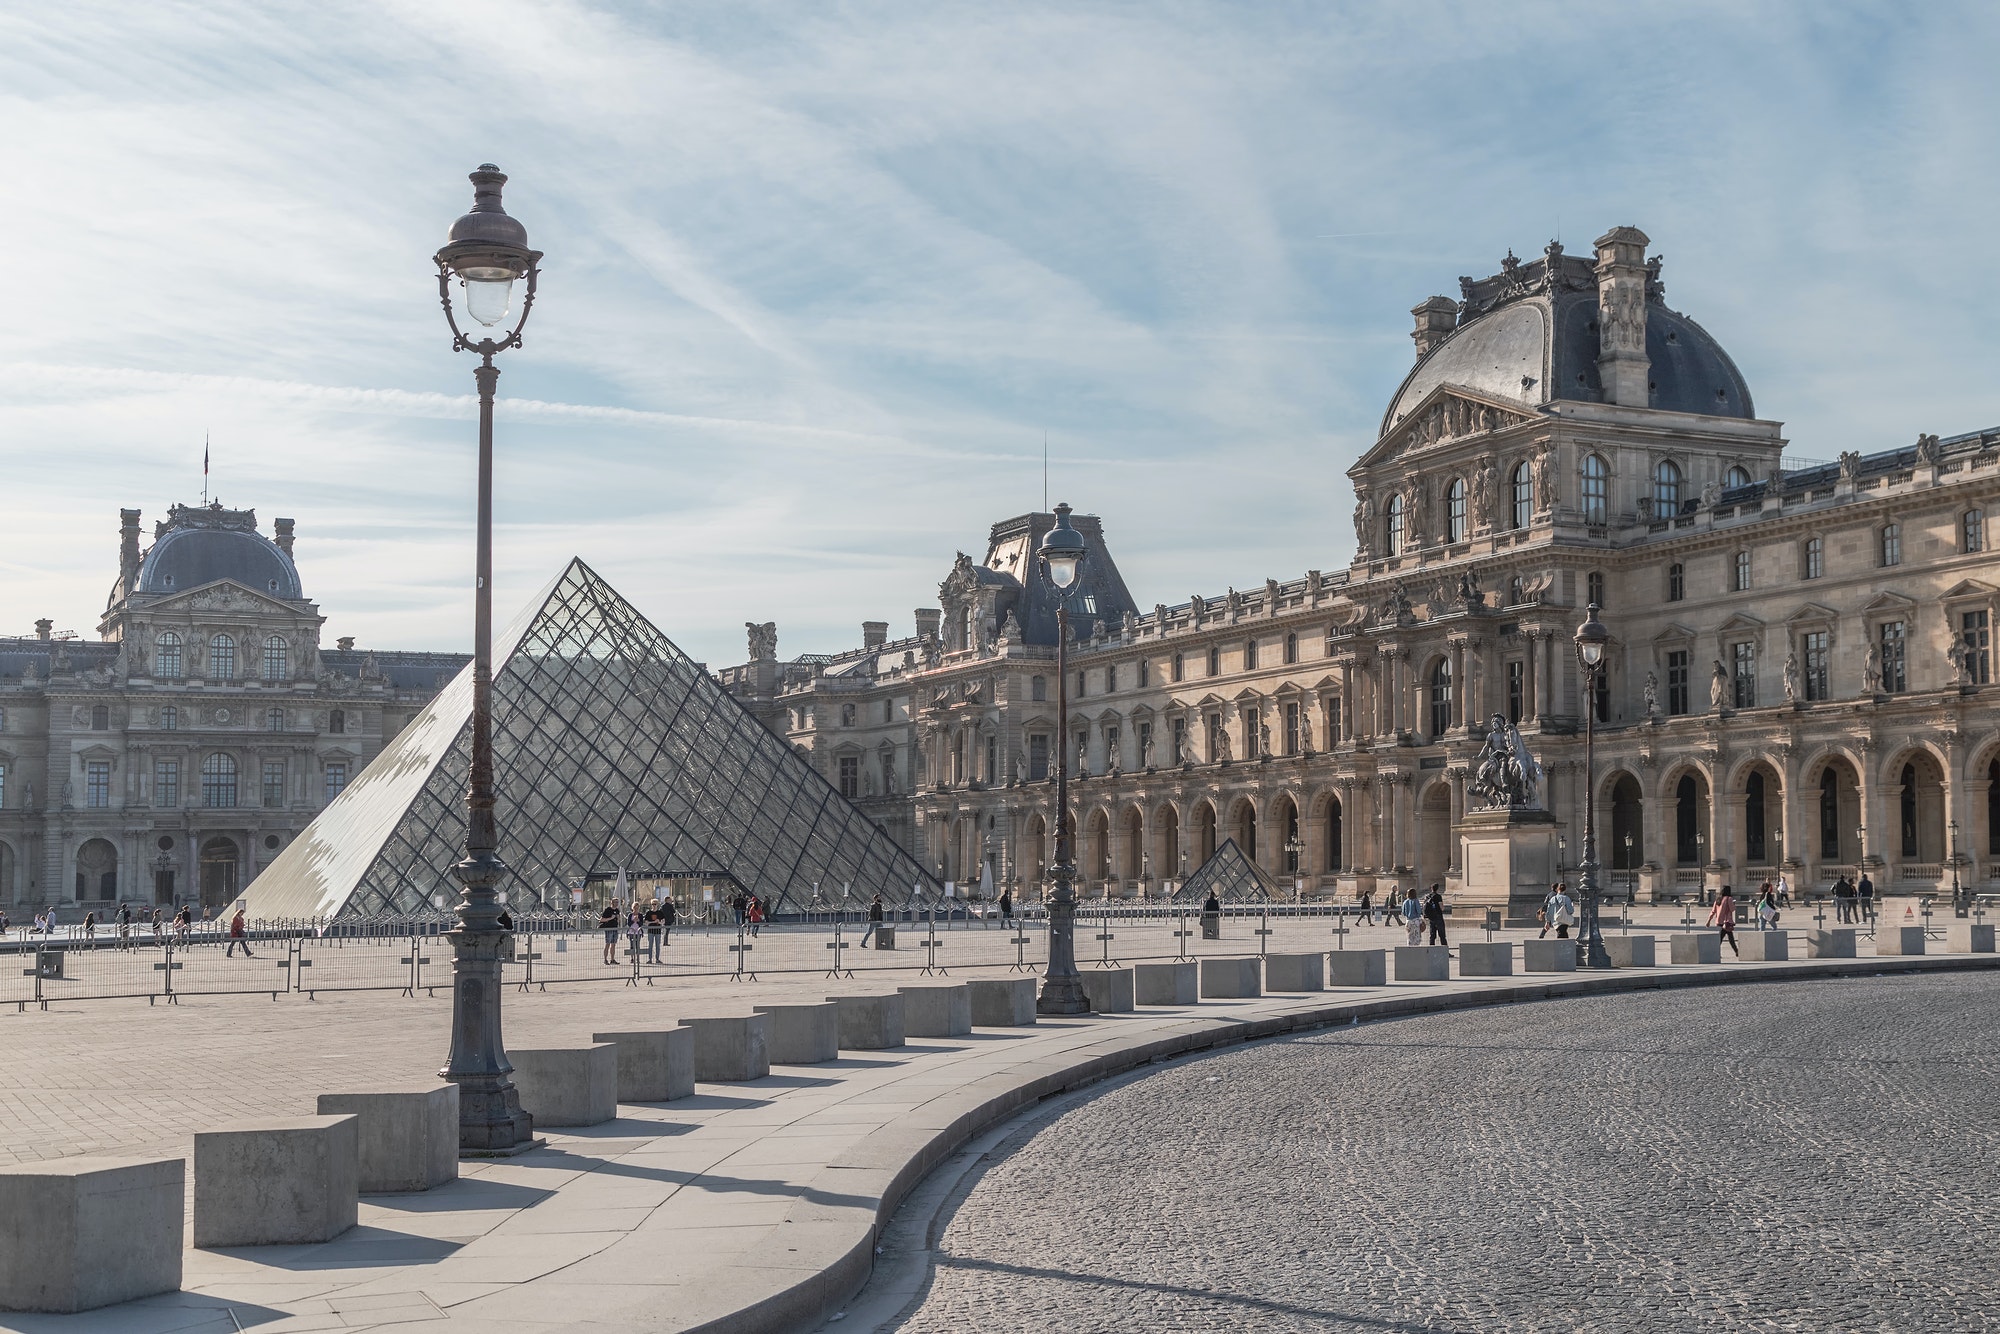 The Louvre in Paris, the largest museum in the world